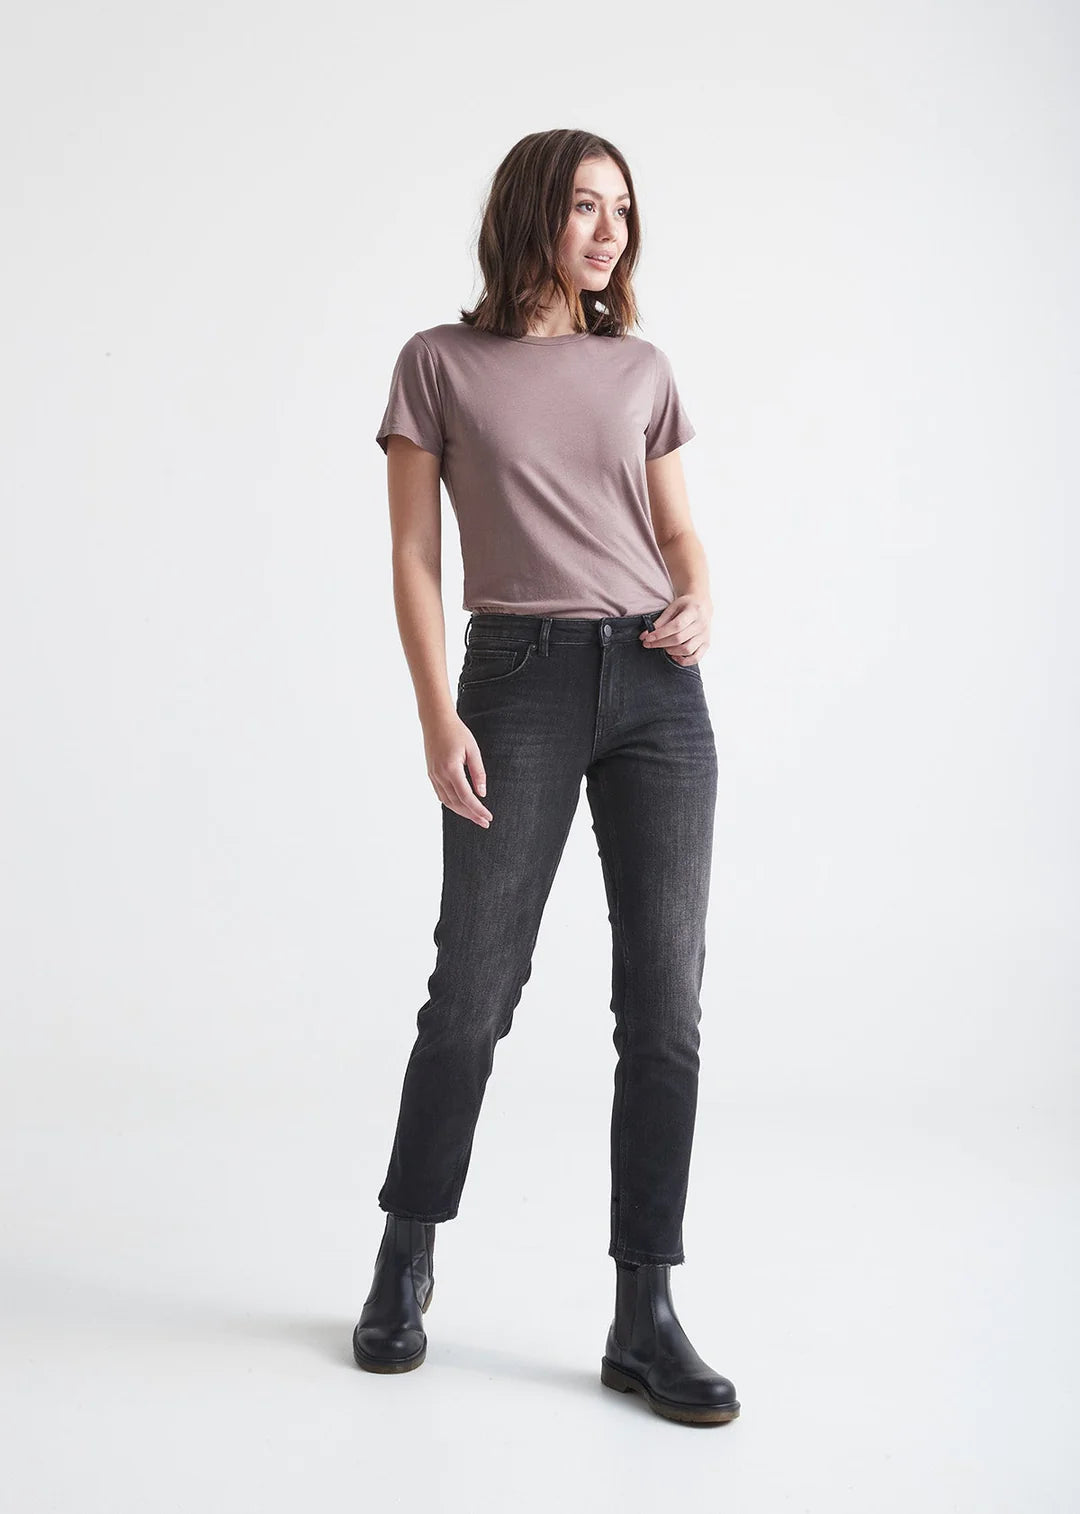 Duer Live Lite High Rise Joggers, 28 Inseam - Womens, FREE SHIPPING in  Canada